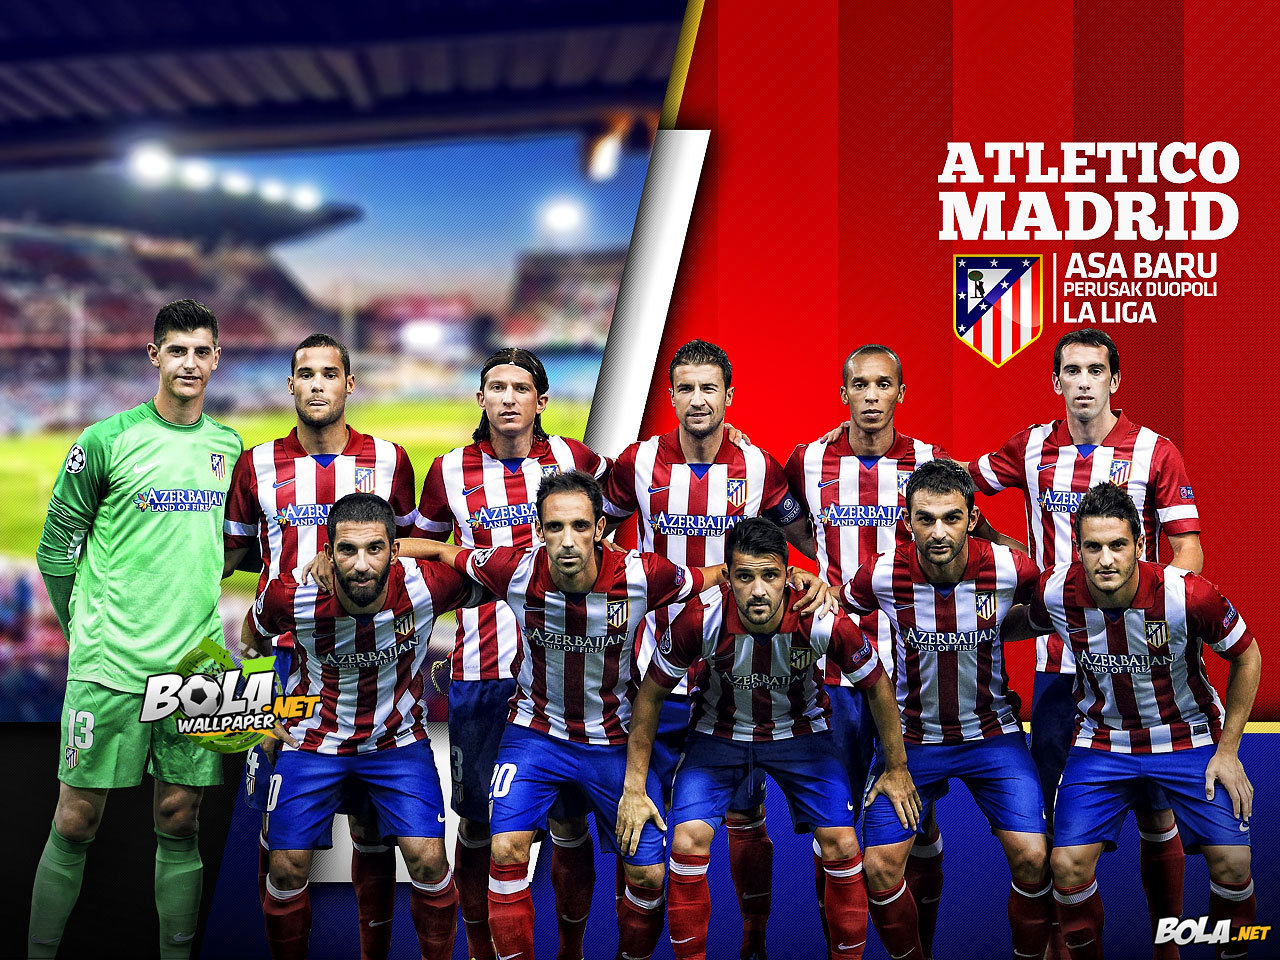 Download Wallpaper Atletico Madrid Bolanet